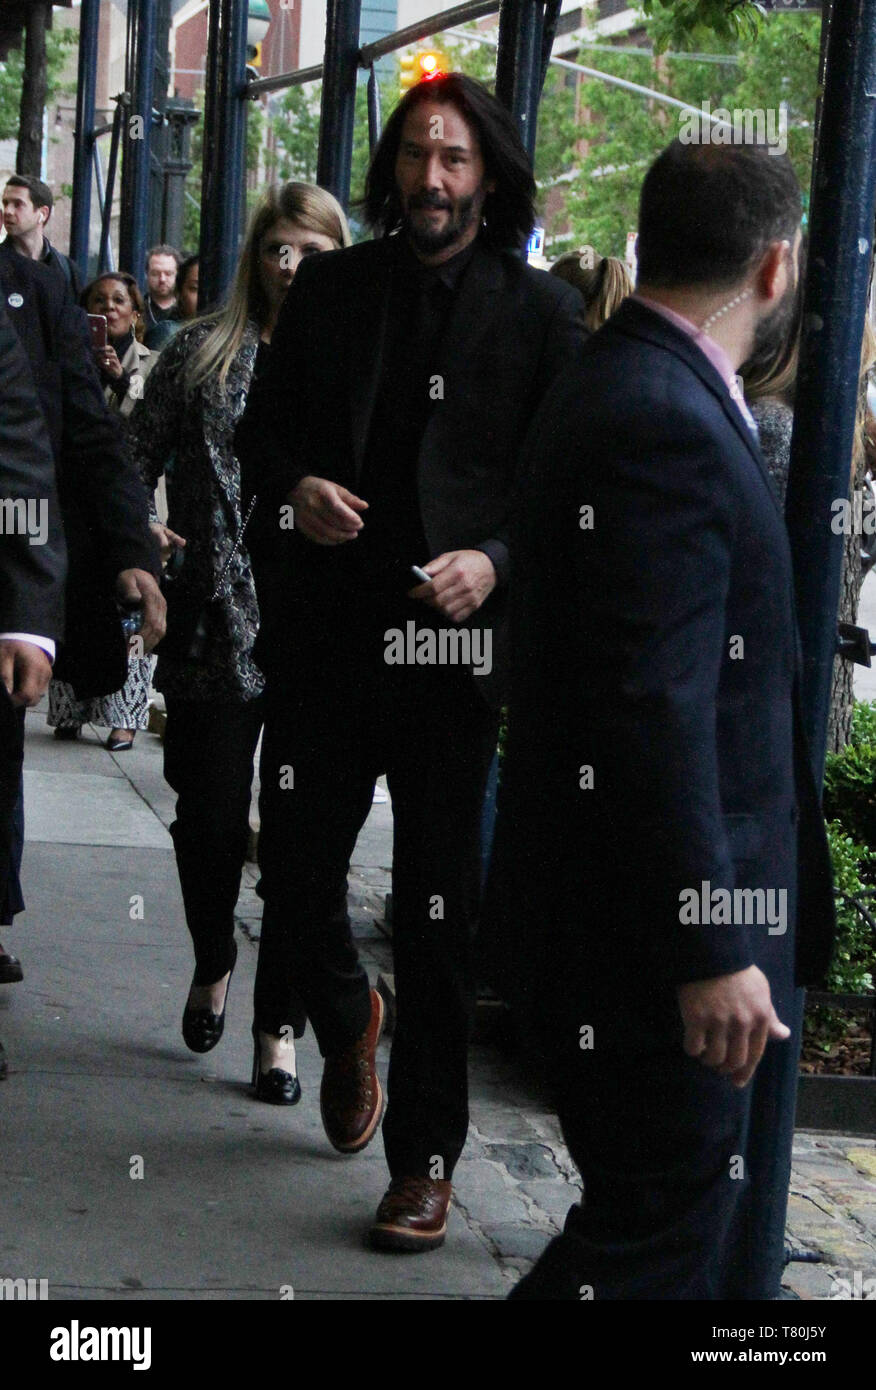 Keanu Reeves Steps Out for 'John Wick: Chapter 3' Premiere in London: Photo  4282844, John Wick, Keanu Reeves Photos